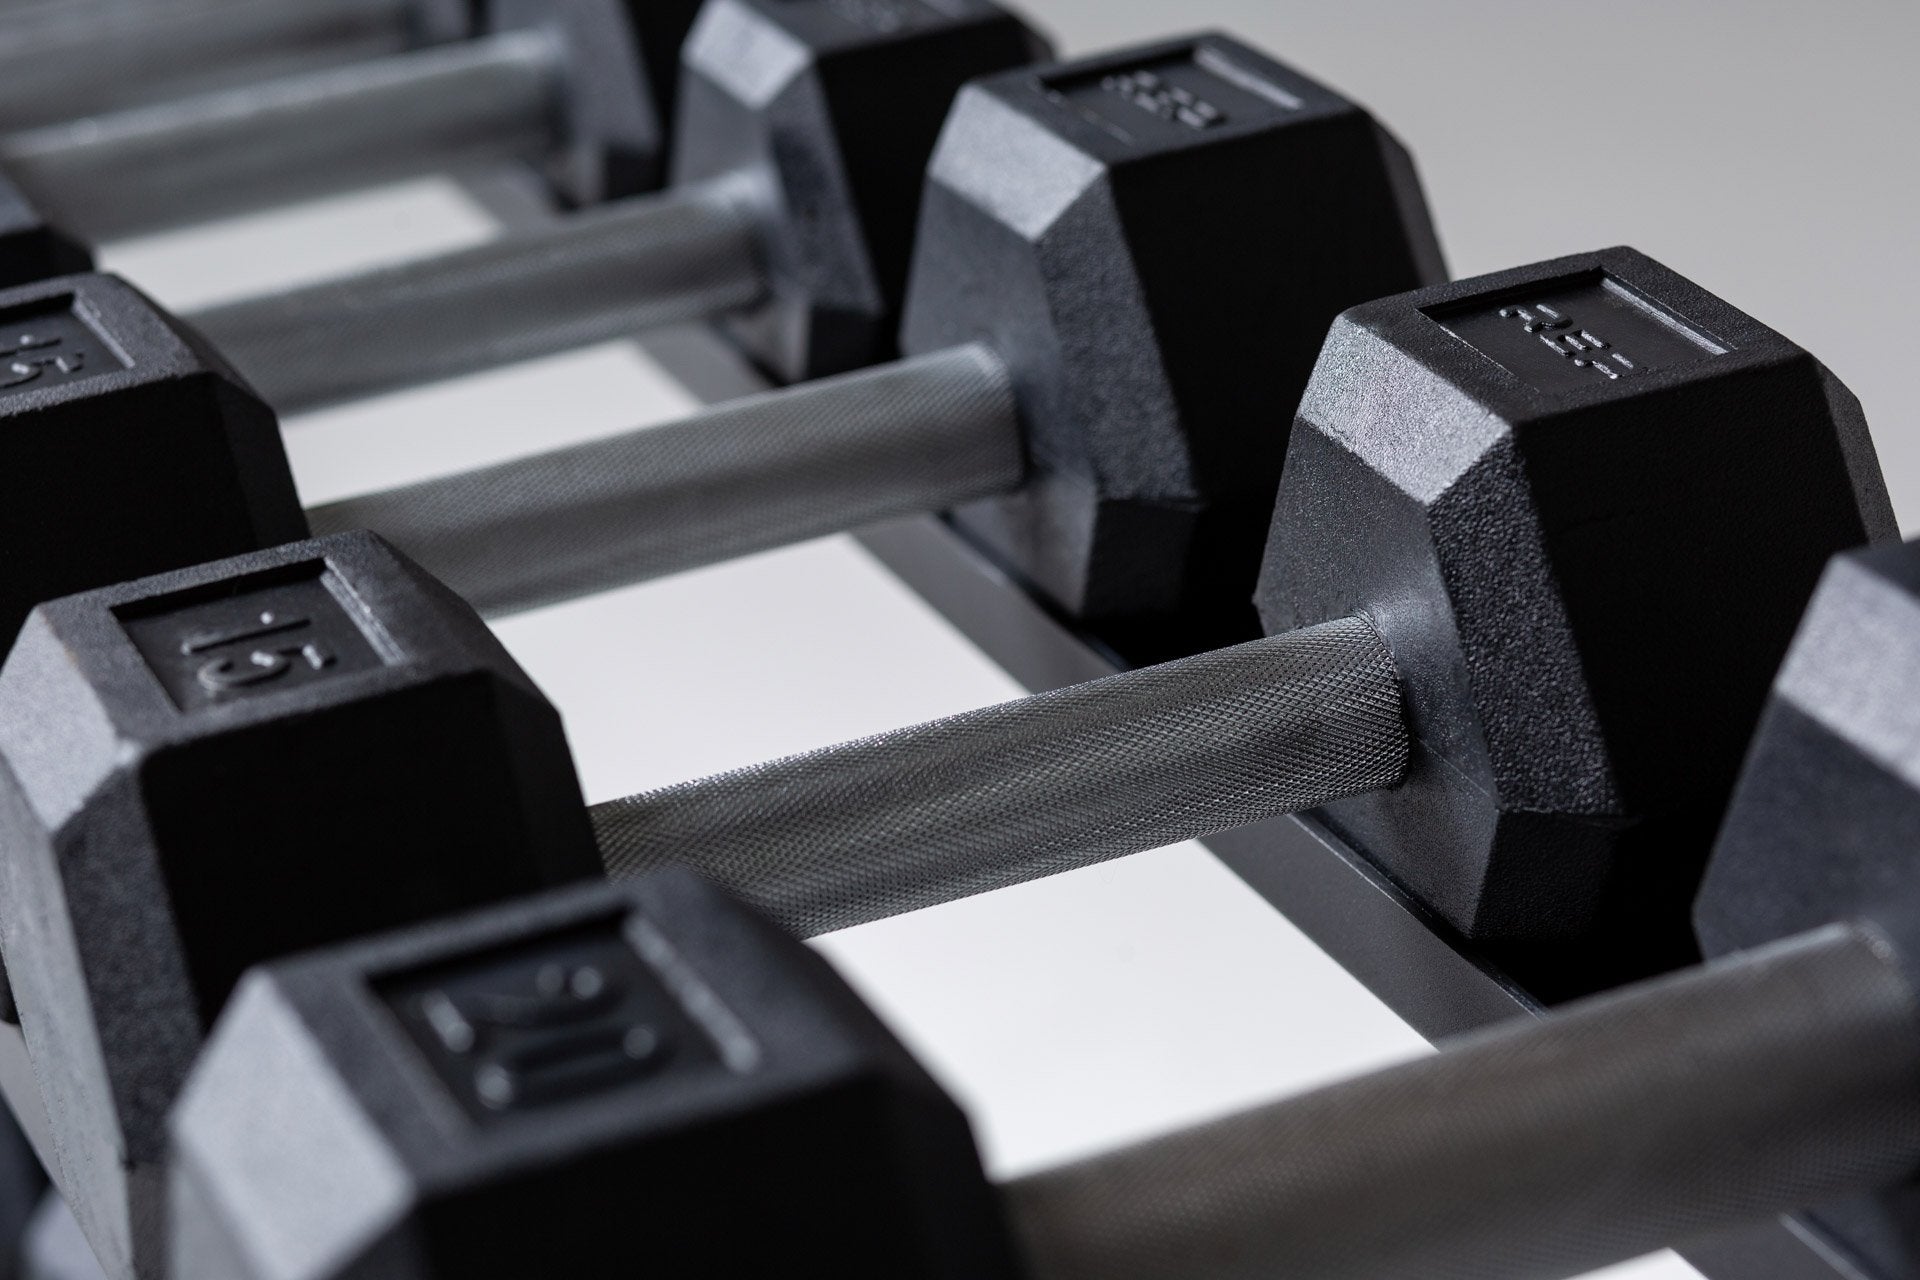 Close-up view of the 15lb pair of a 5-50lb Hex Dumbbell Set being stored on the top shelf of a REP Dumbbell Rack.